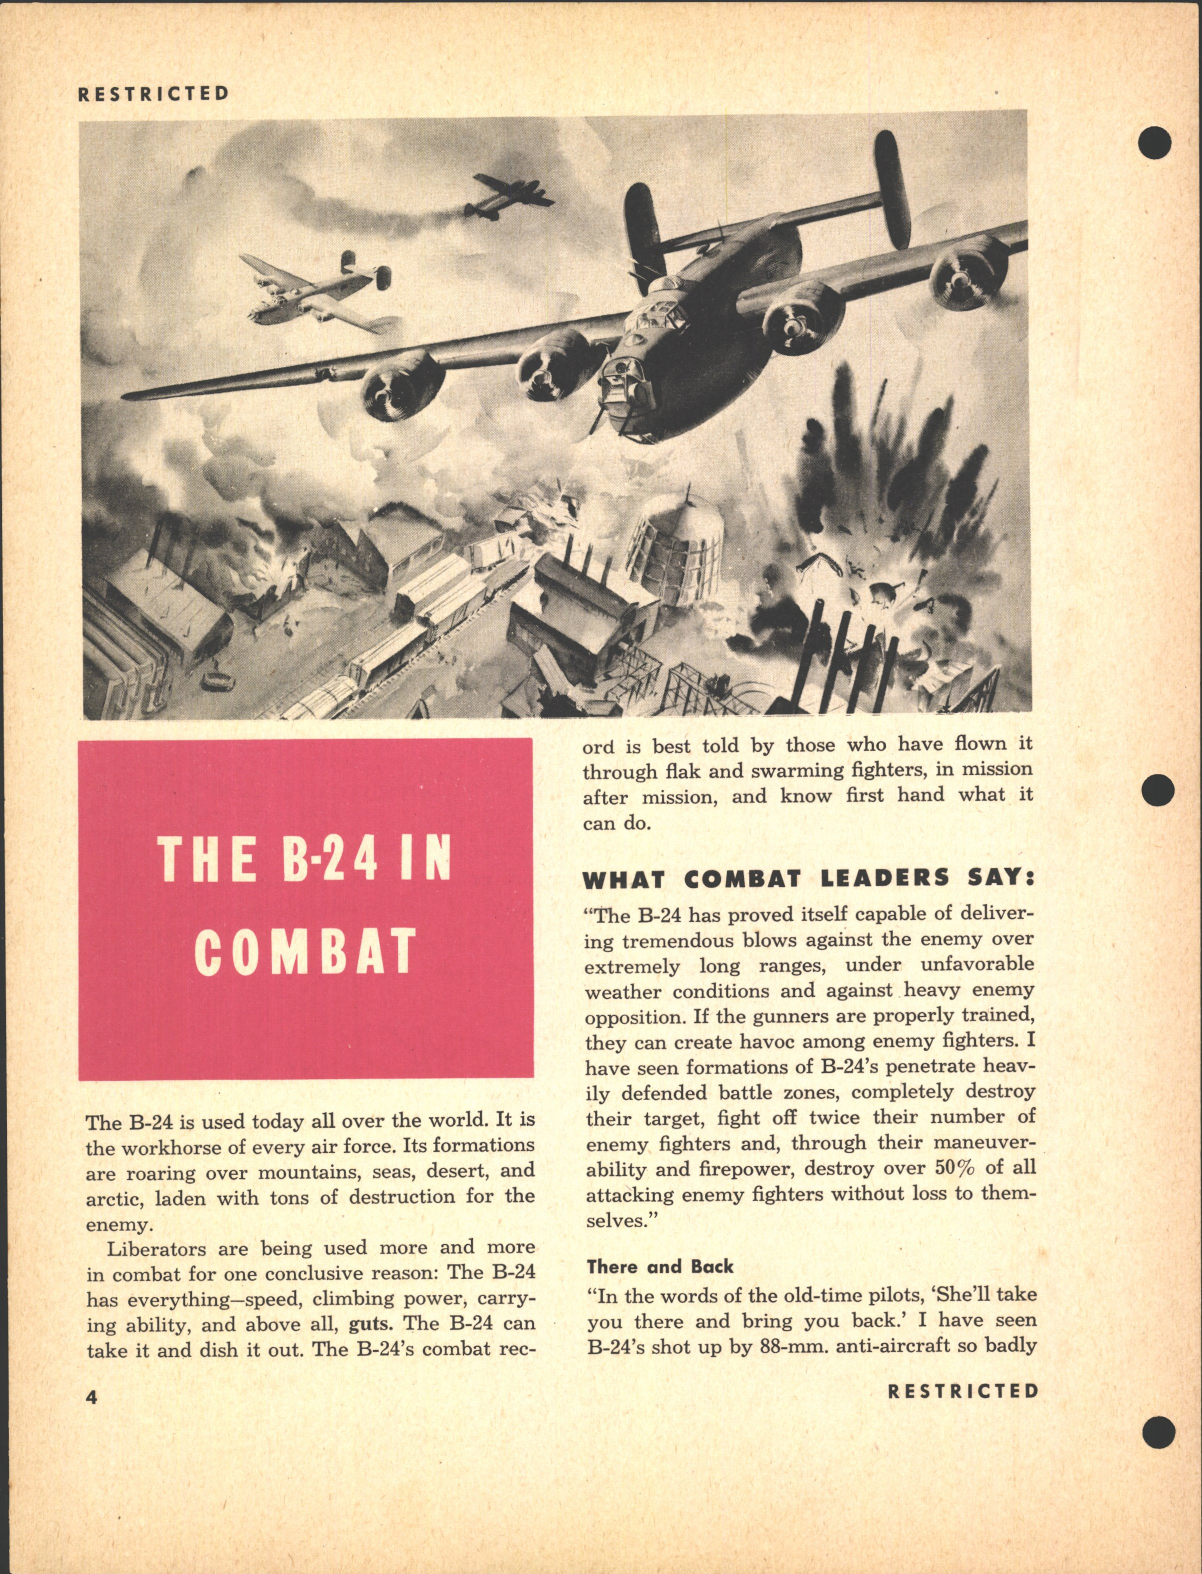 Sample page 6 from AirCorps Library document: Pilot Training Manual for the B-24 Liberator